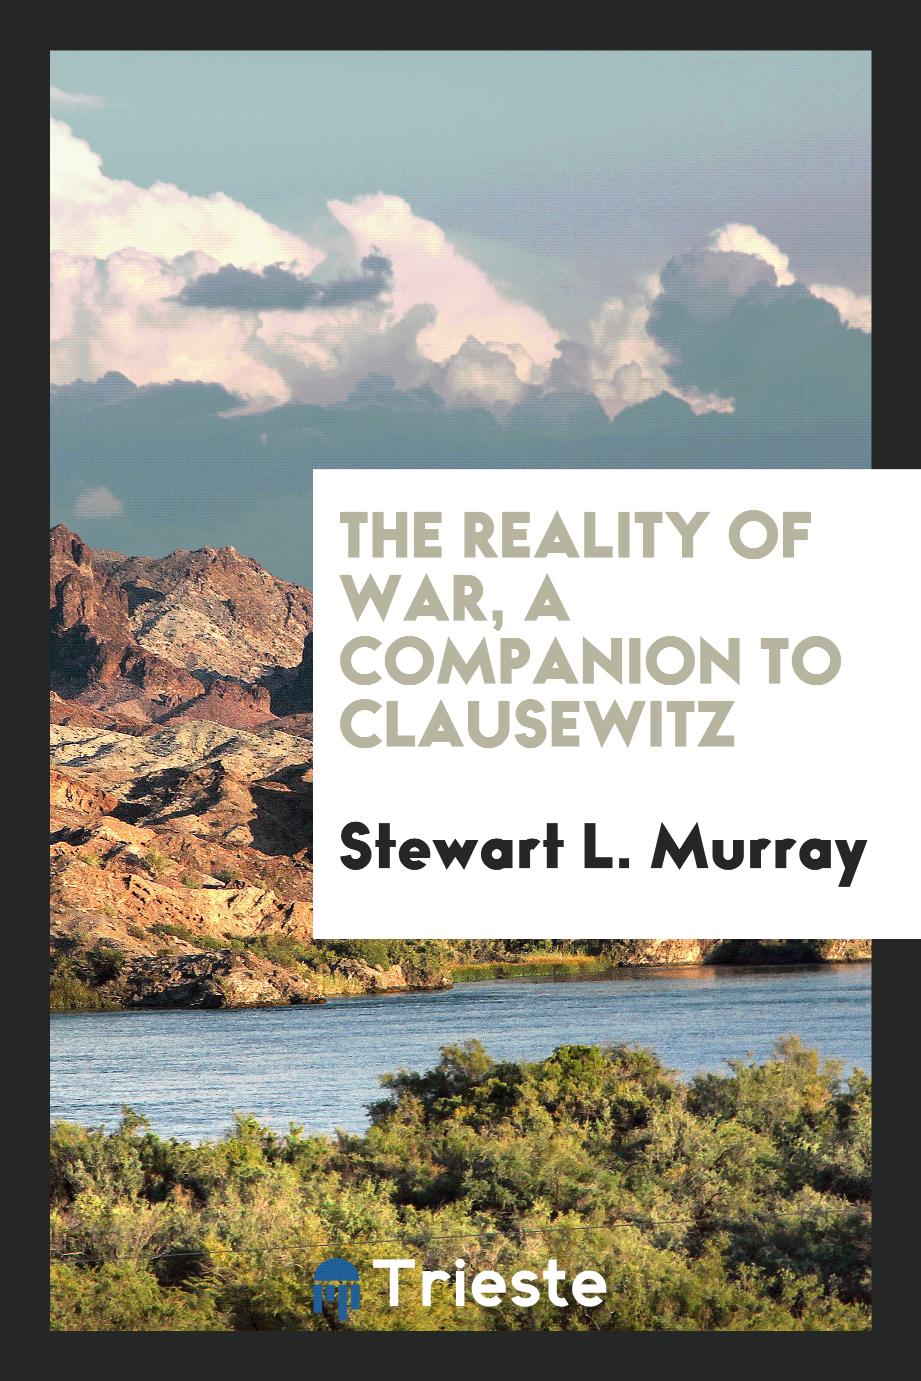 The reality of war, a companion to Clausewitz